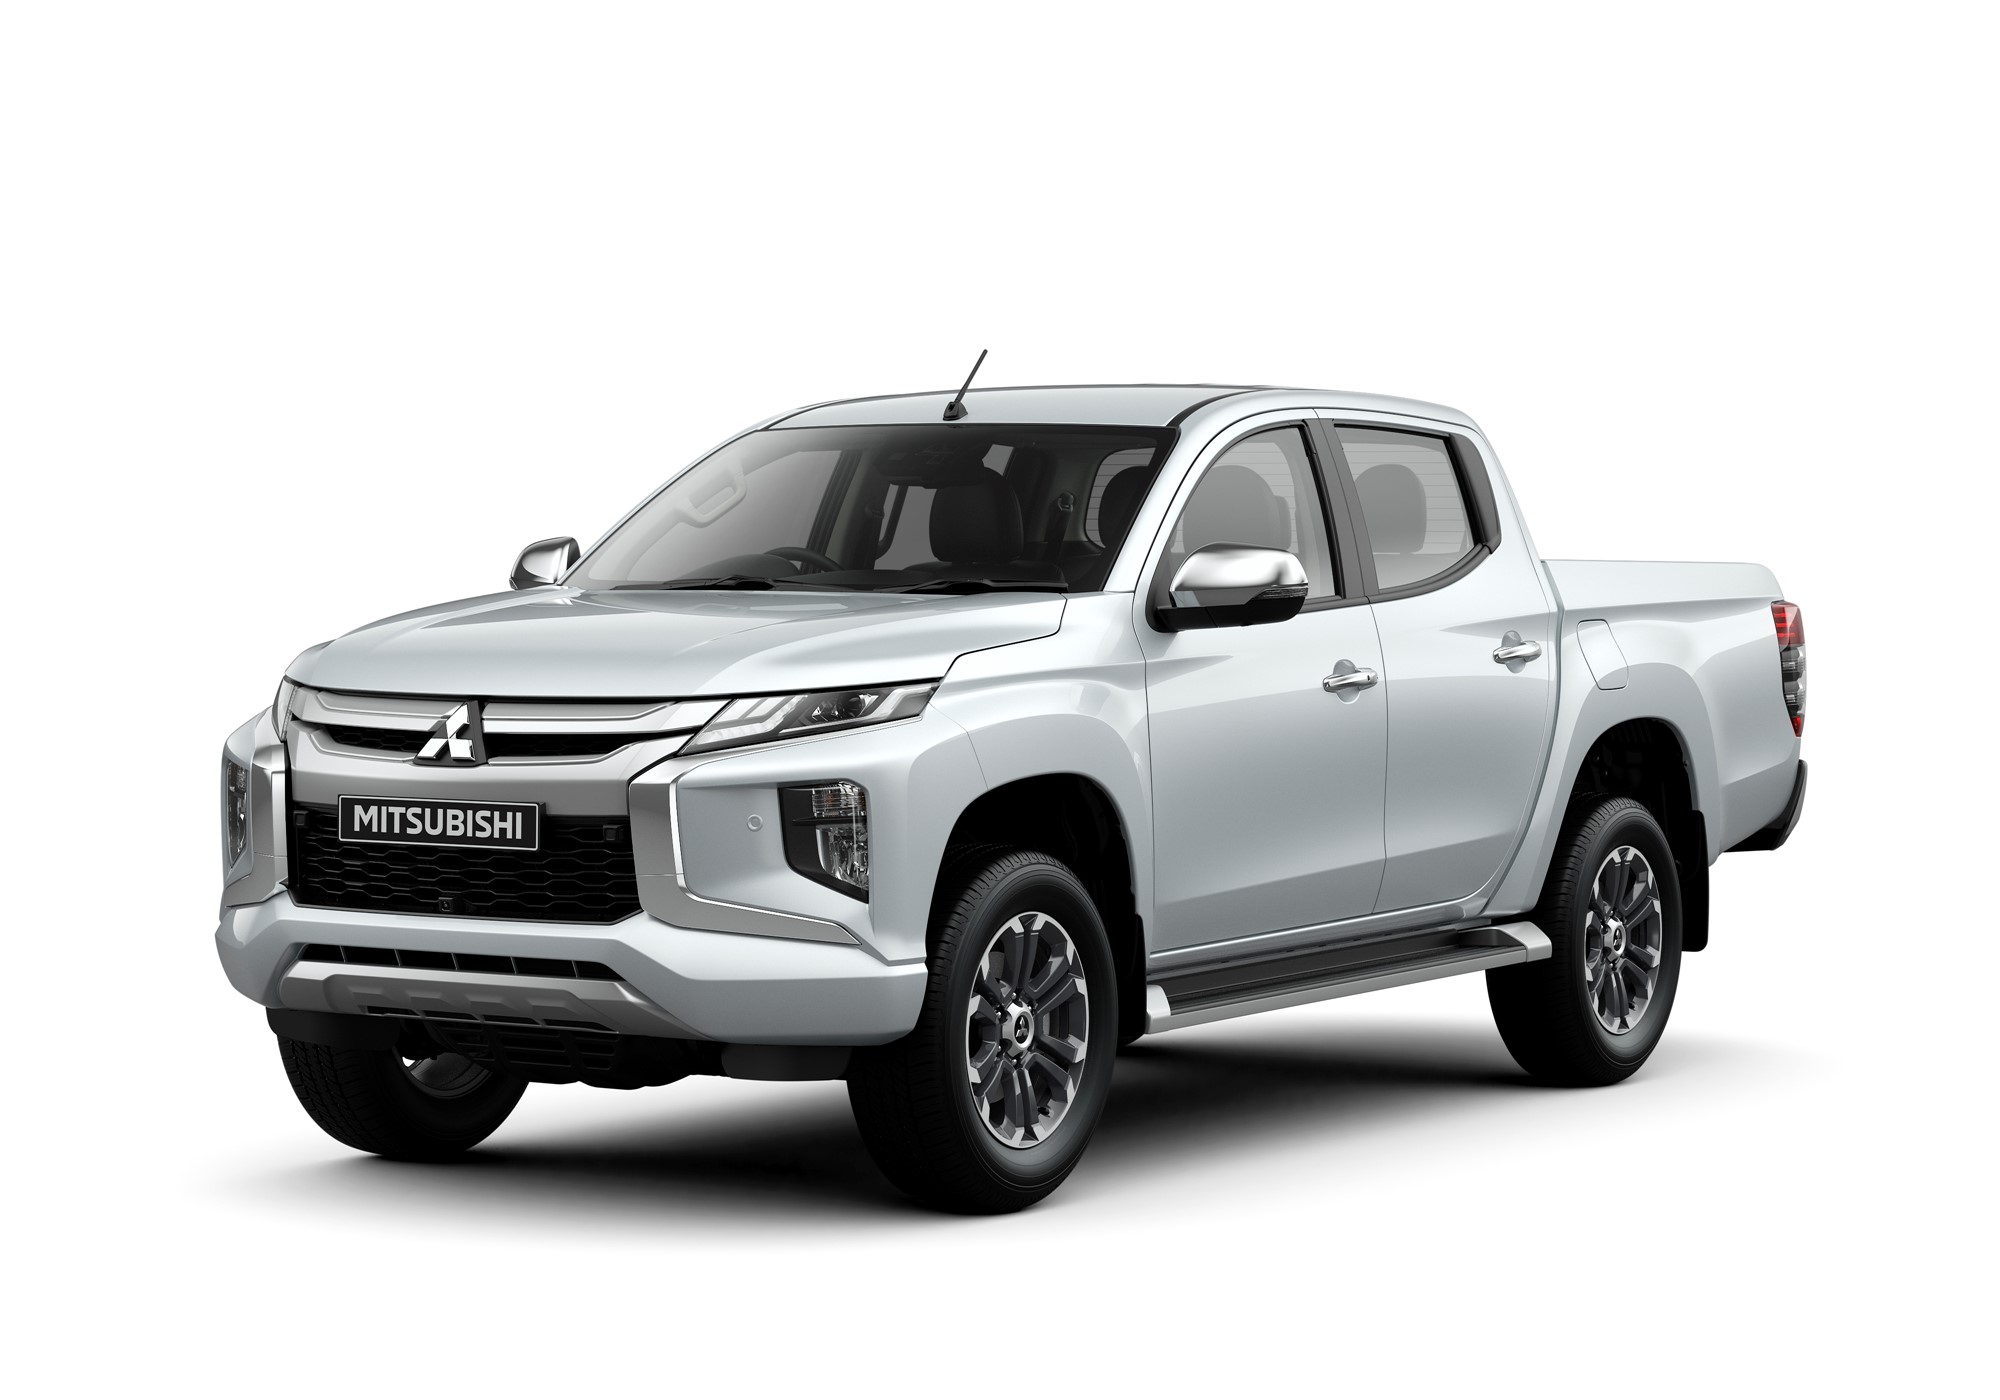 New Mitsubishi L200 unveiled ahead of summer debut (gallery